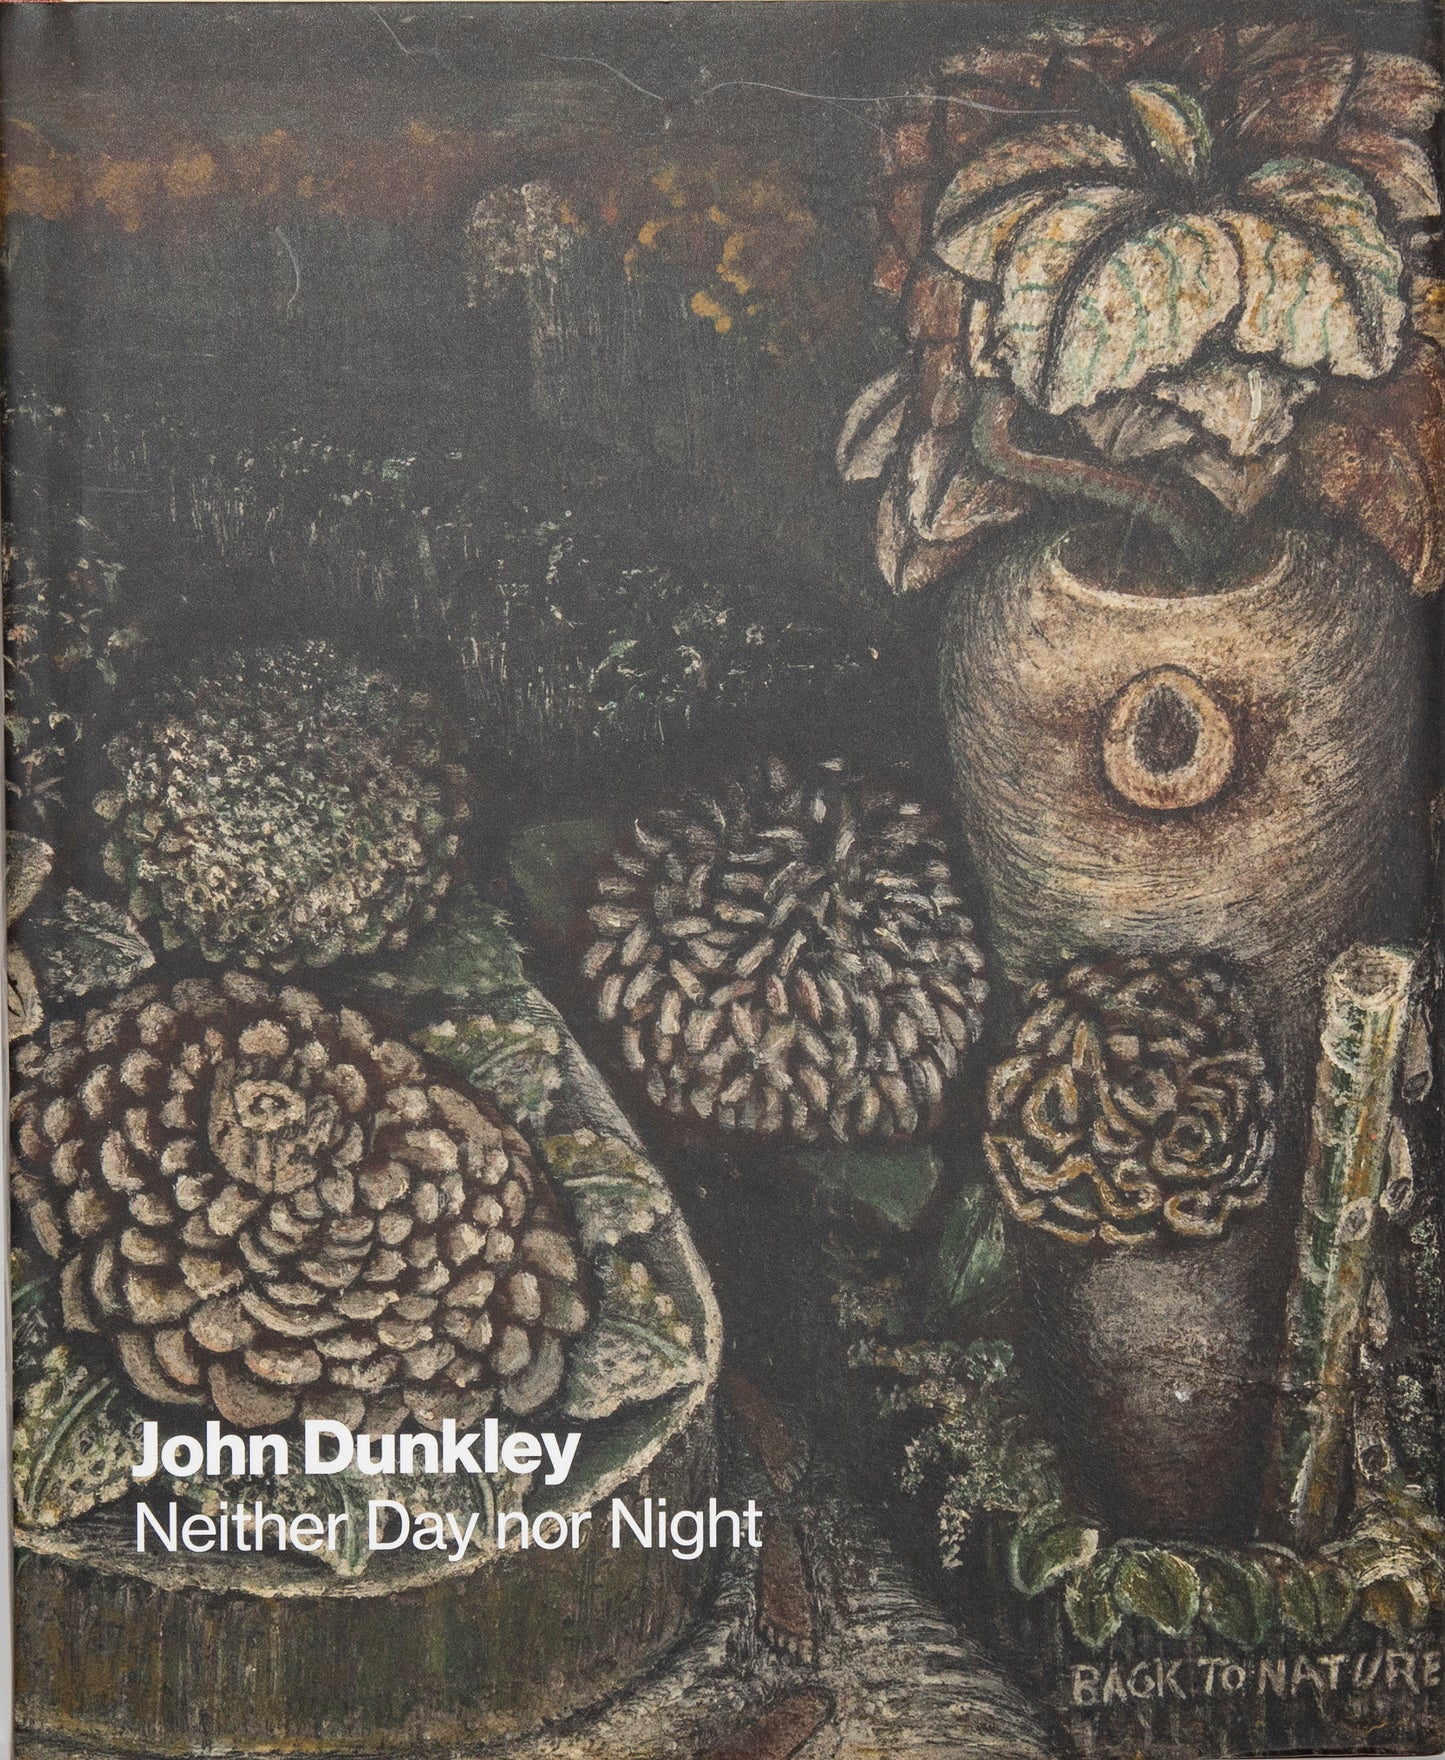 John Dunkley : Neither Day nor Night